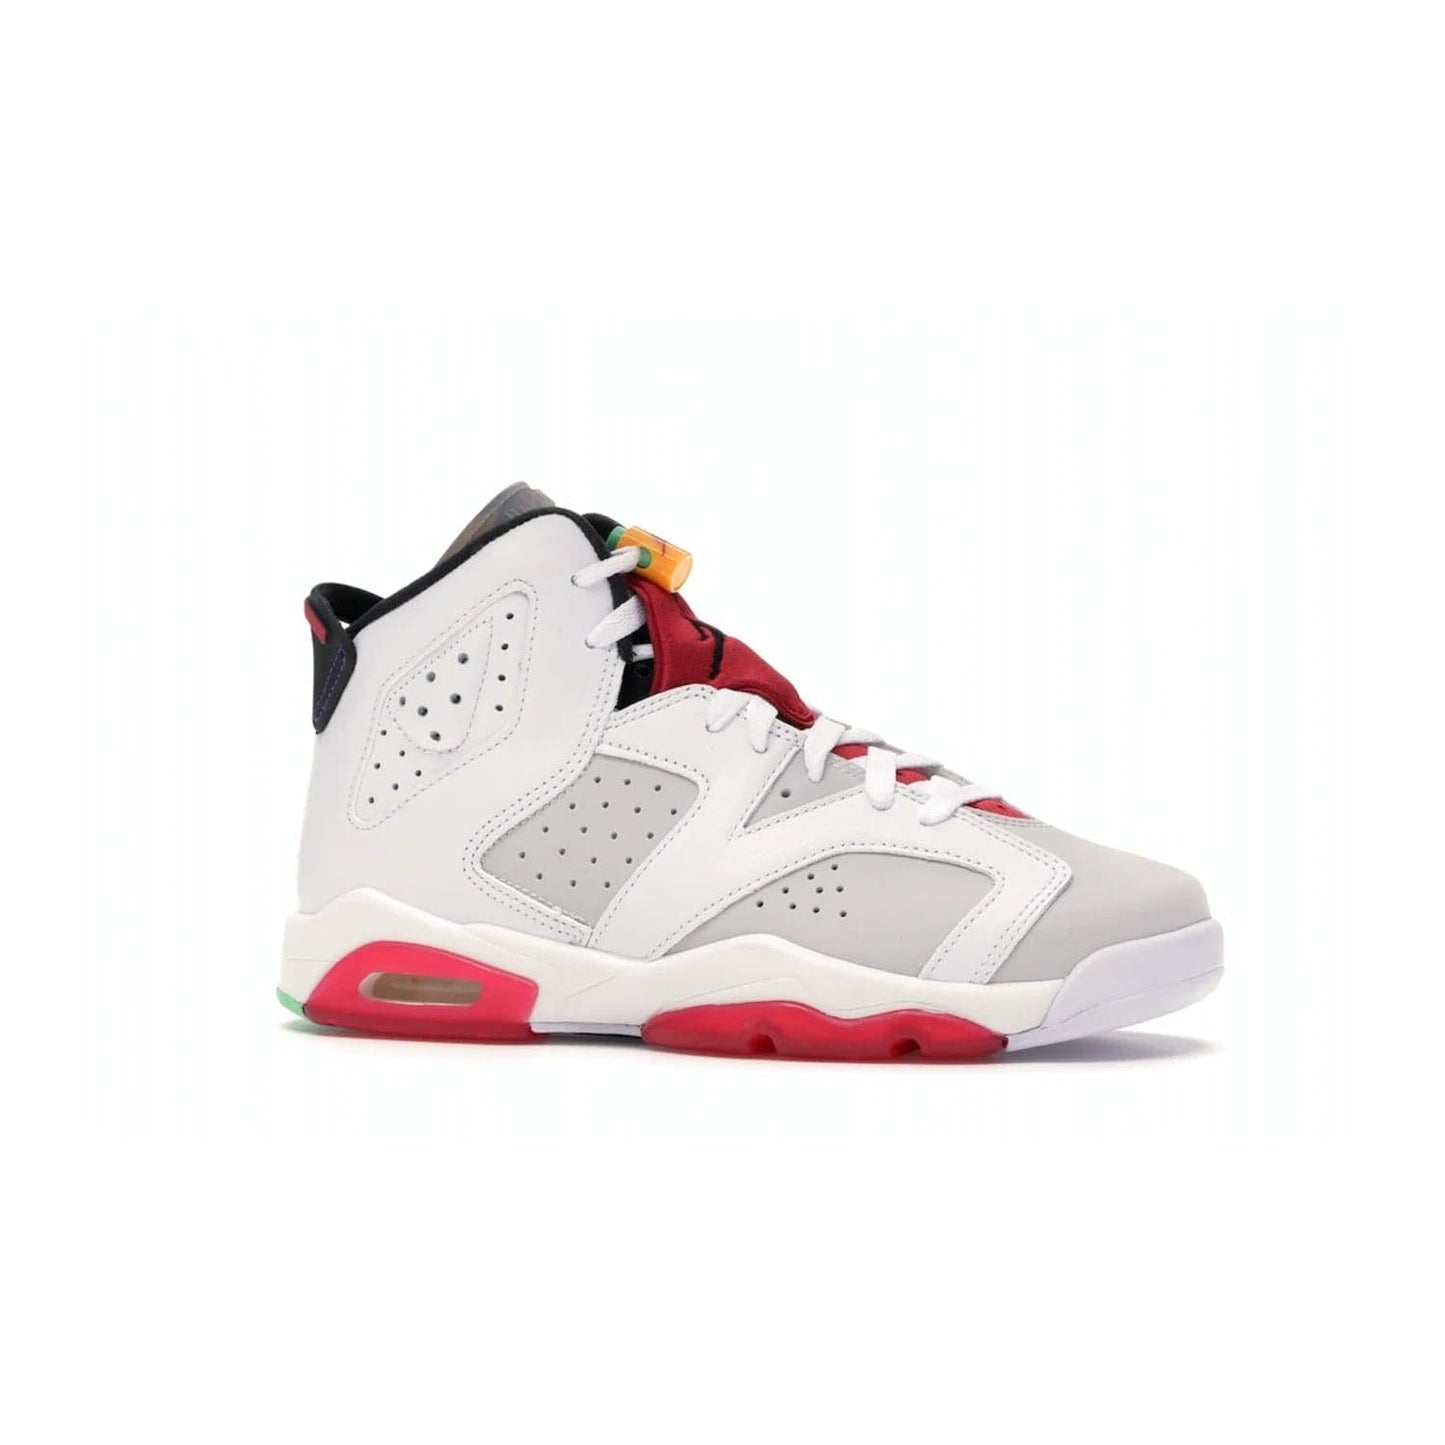 Jordan 6 Retro Hare (GS) - Image 3 - Only at www.BallersClubKickz.com - The Air Jordan 6 Hare GS. Comfortable suede upper, perforations, red pods, two-tone midsole, and signature "Jumpman" emblem. Released 17 June 2020. Perfect for any sneakerhead.